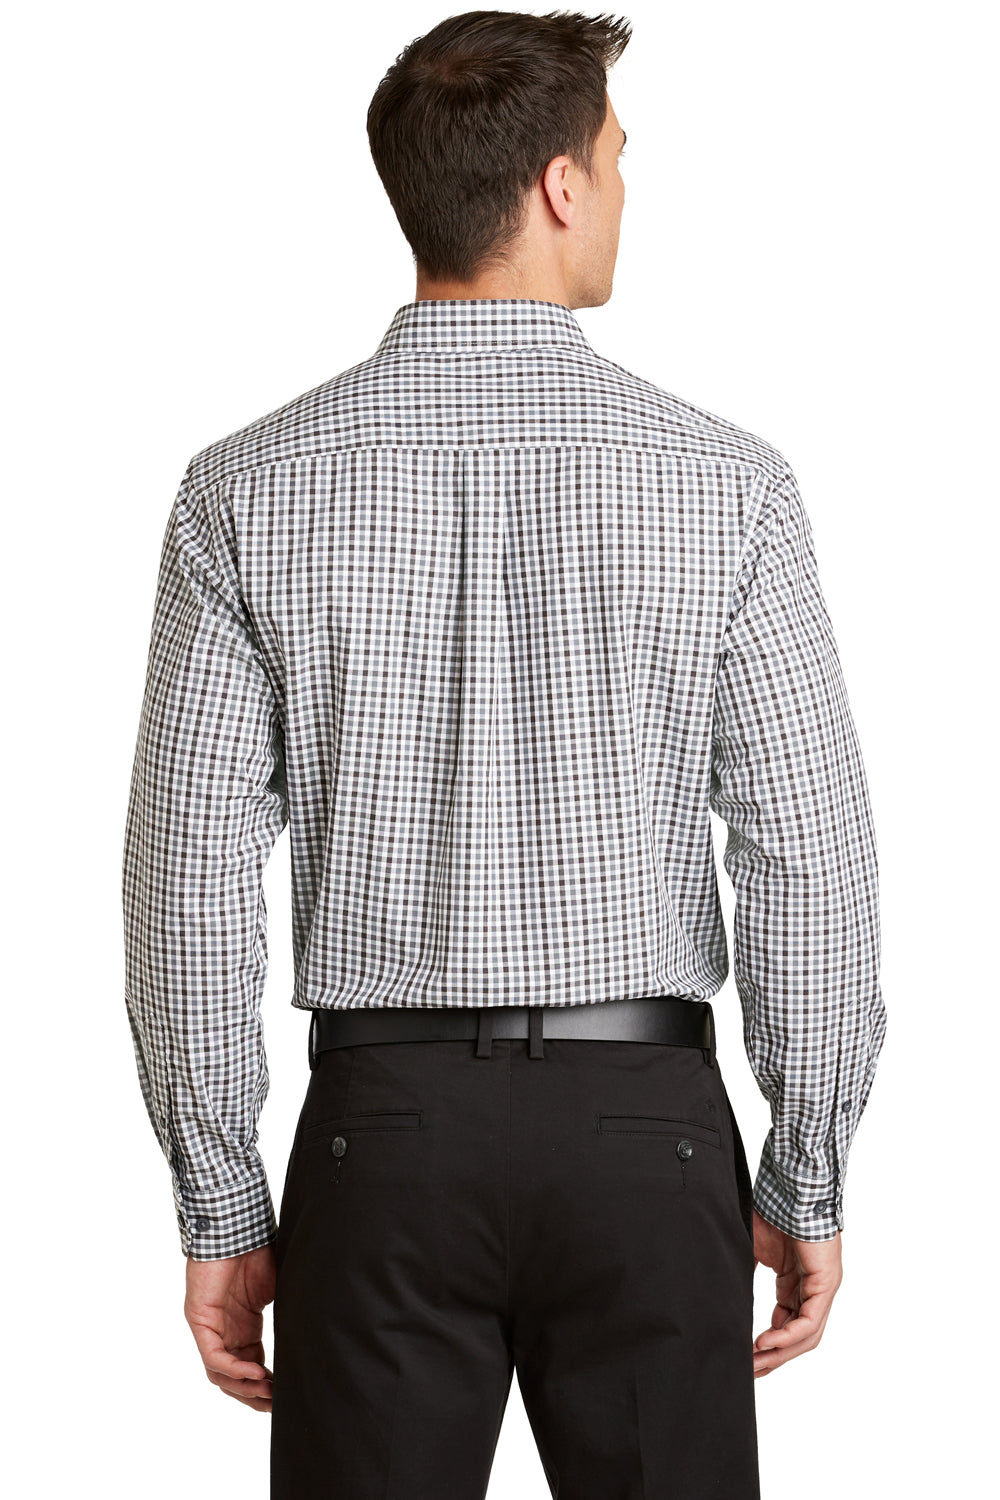 Port Authority S654 Mens Easy Care Wrinkle Resistant Long Sleeve Button Down Shirt w/ Pocket Black/Charcoal Grey Back